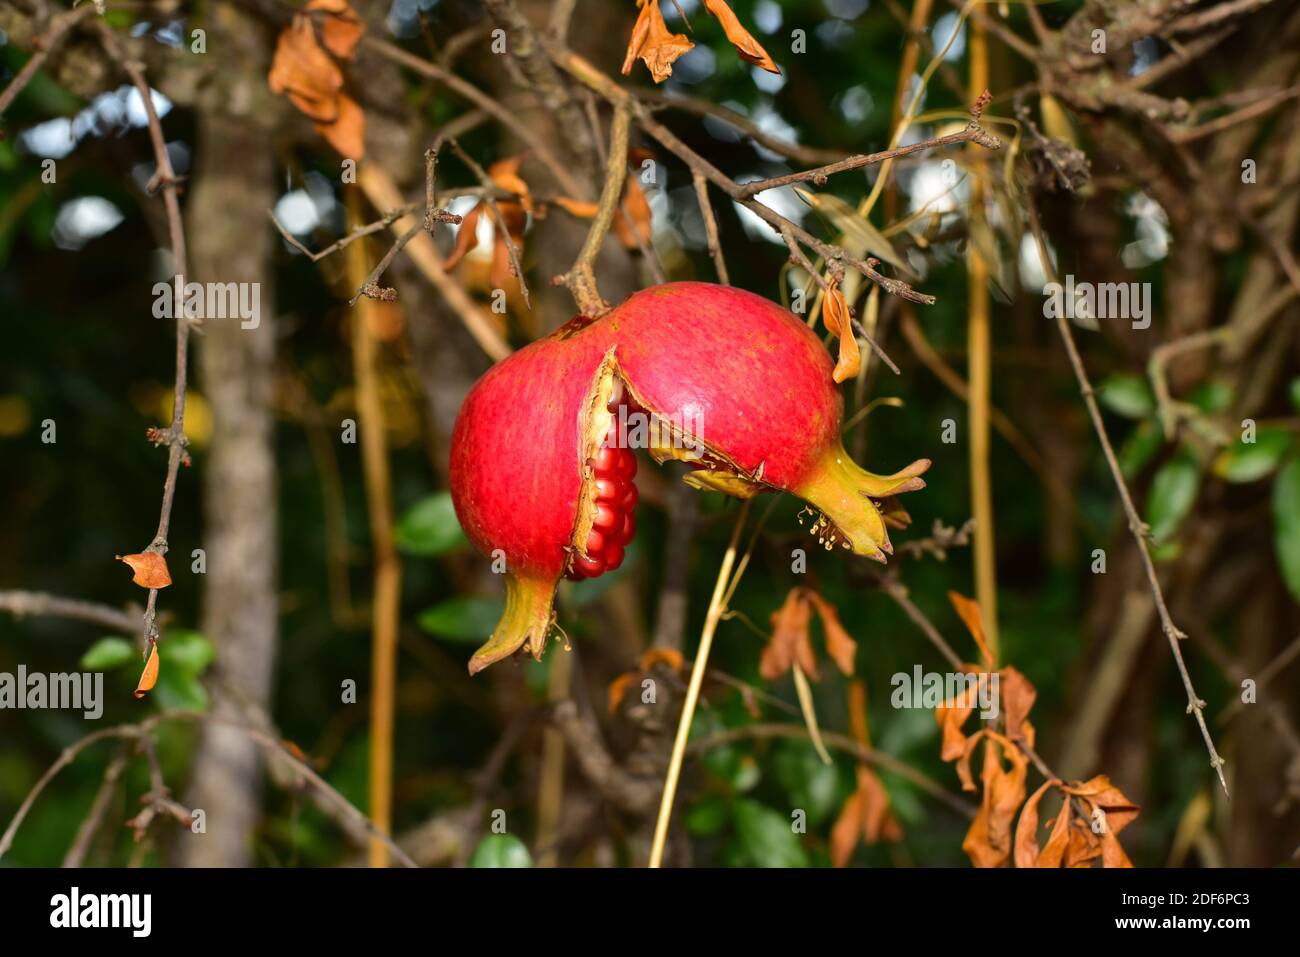 Pomegranate (Punica granatum) is a deciduous shrub native to Asia, from Iran to India. Is widely cultivated for its edible fruits. Stock Photo